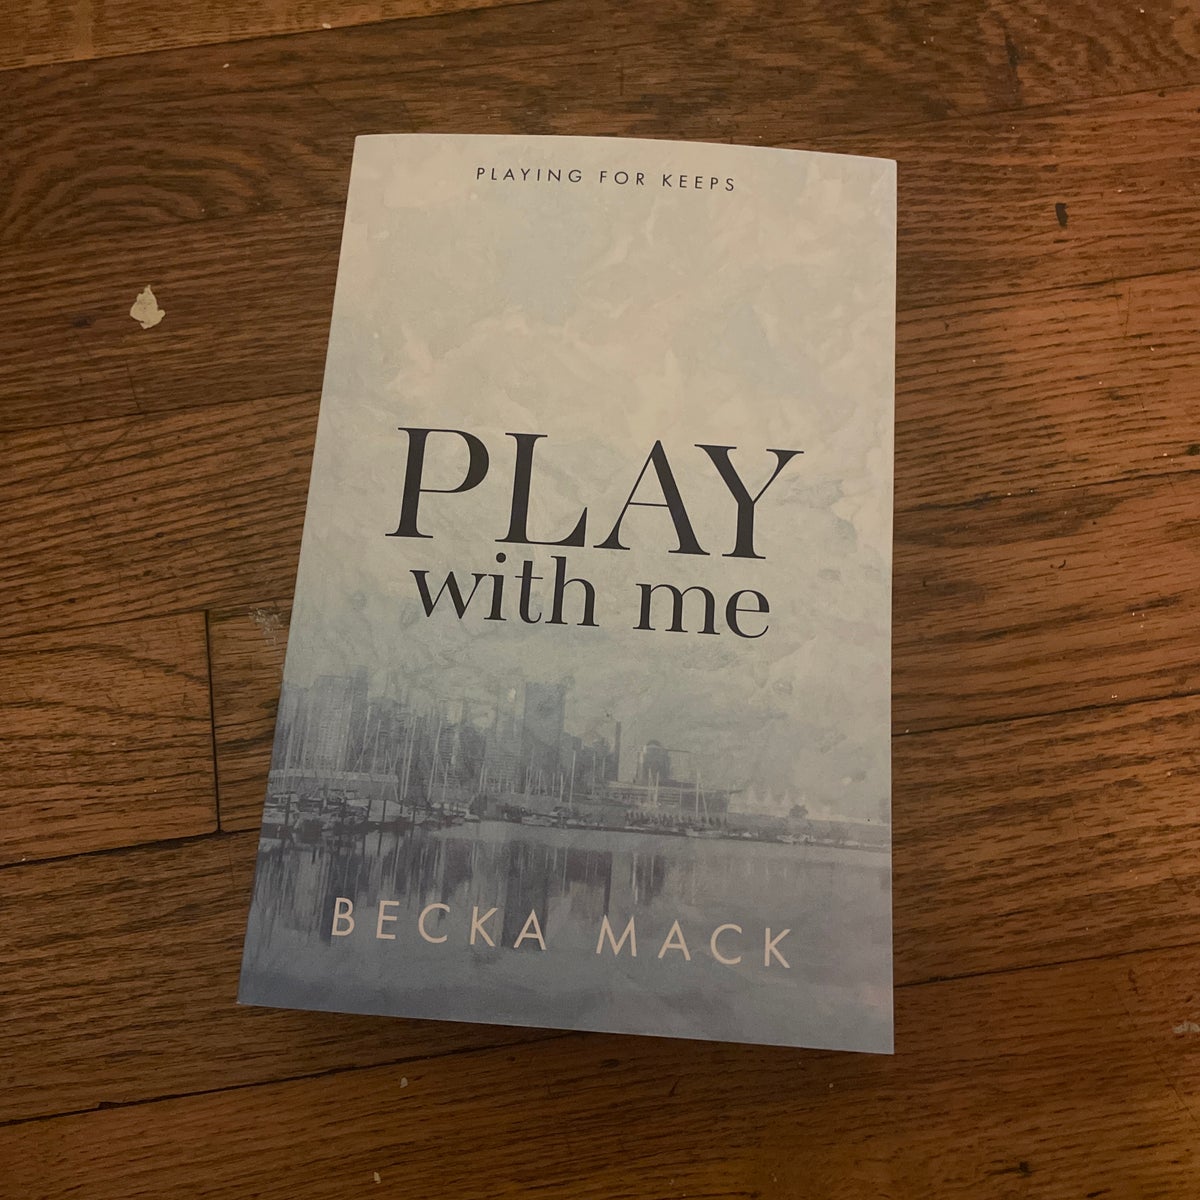 📖 Play with me by @🌻Becka Mack #playwithmebeckamack